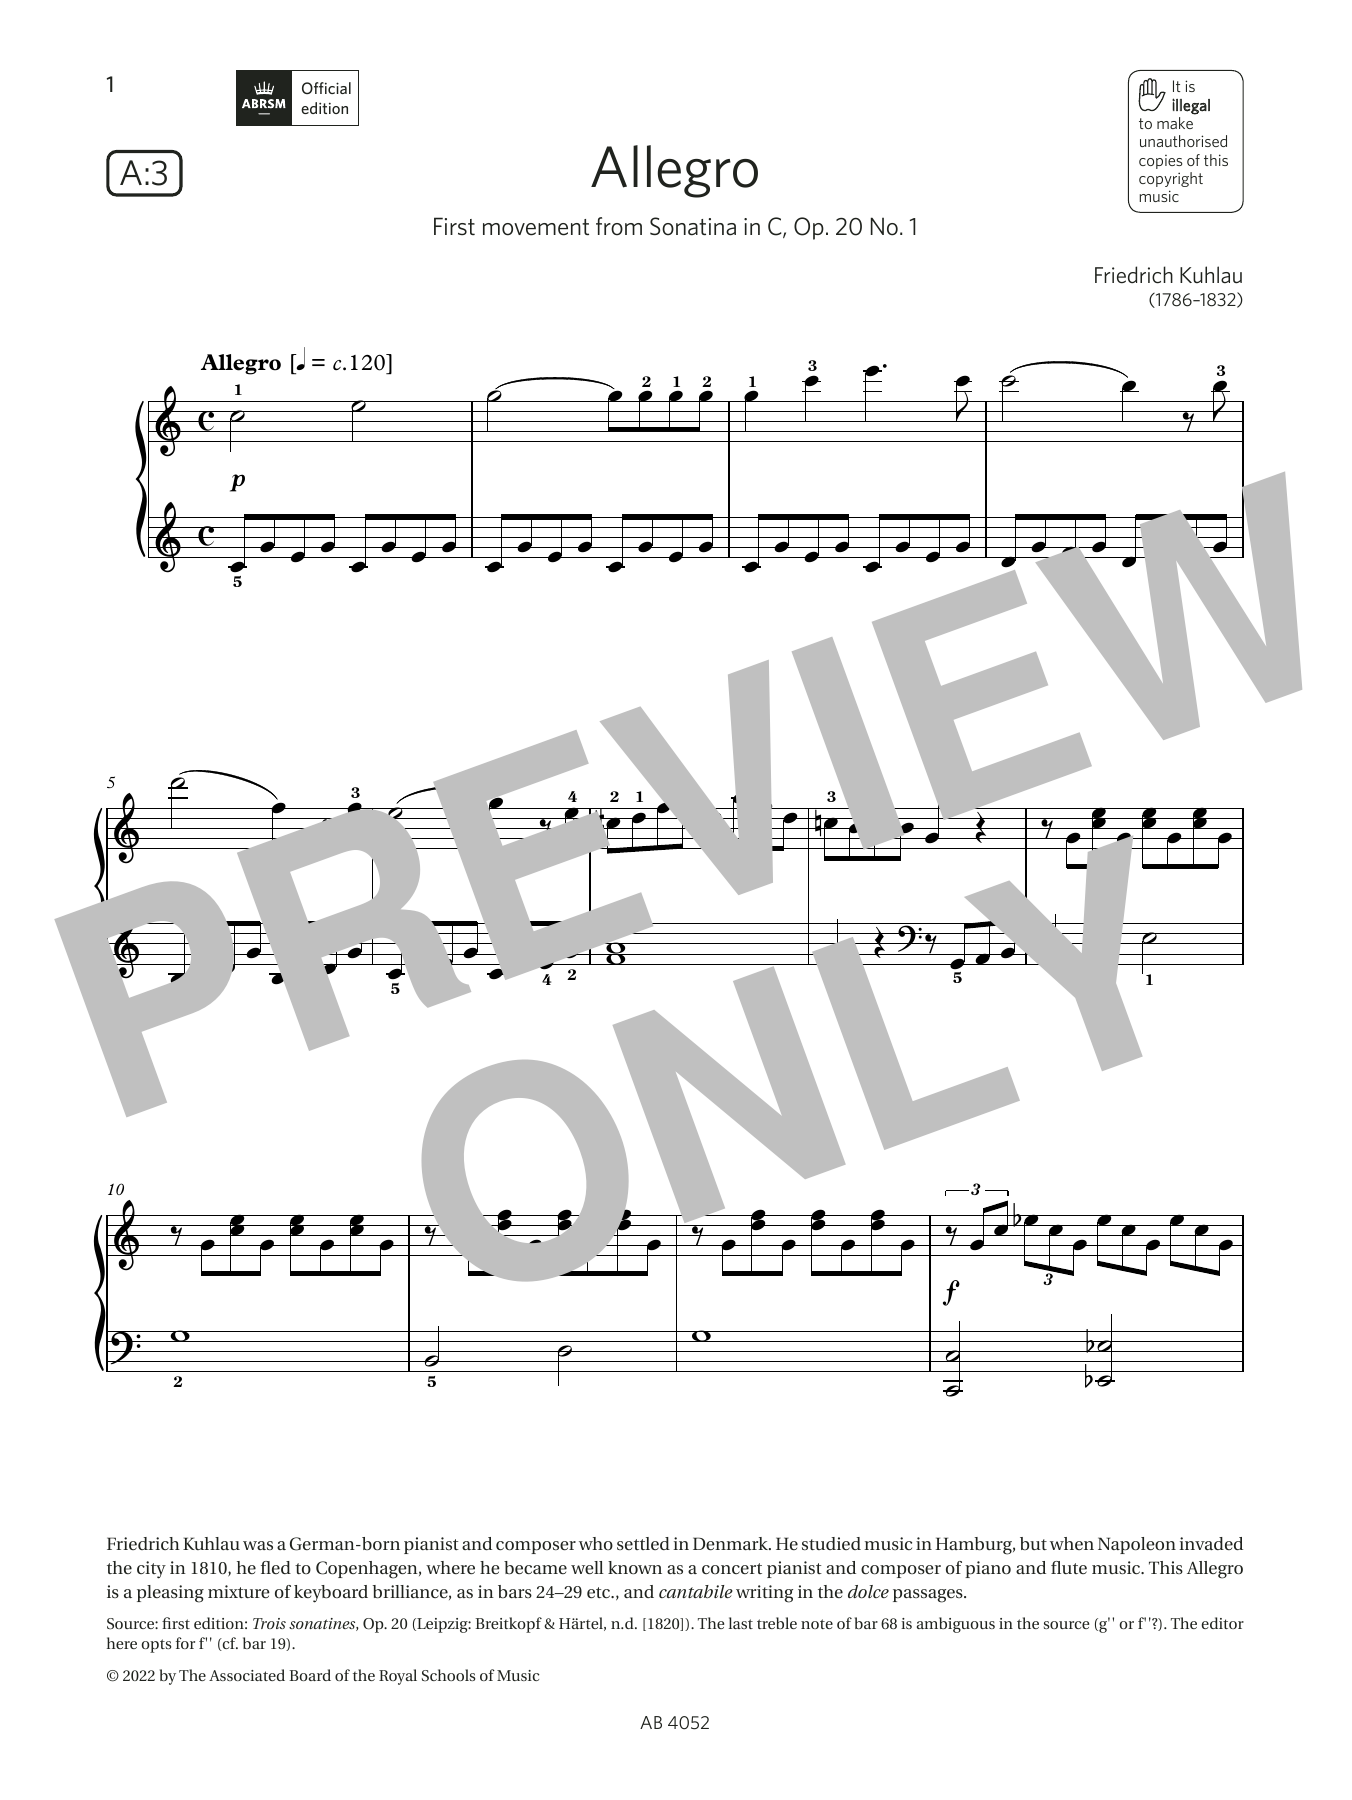 Download Friedrich Kuhlau Allegro (Grade 6, list A3, from the ABR Sheet Music